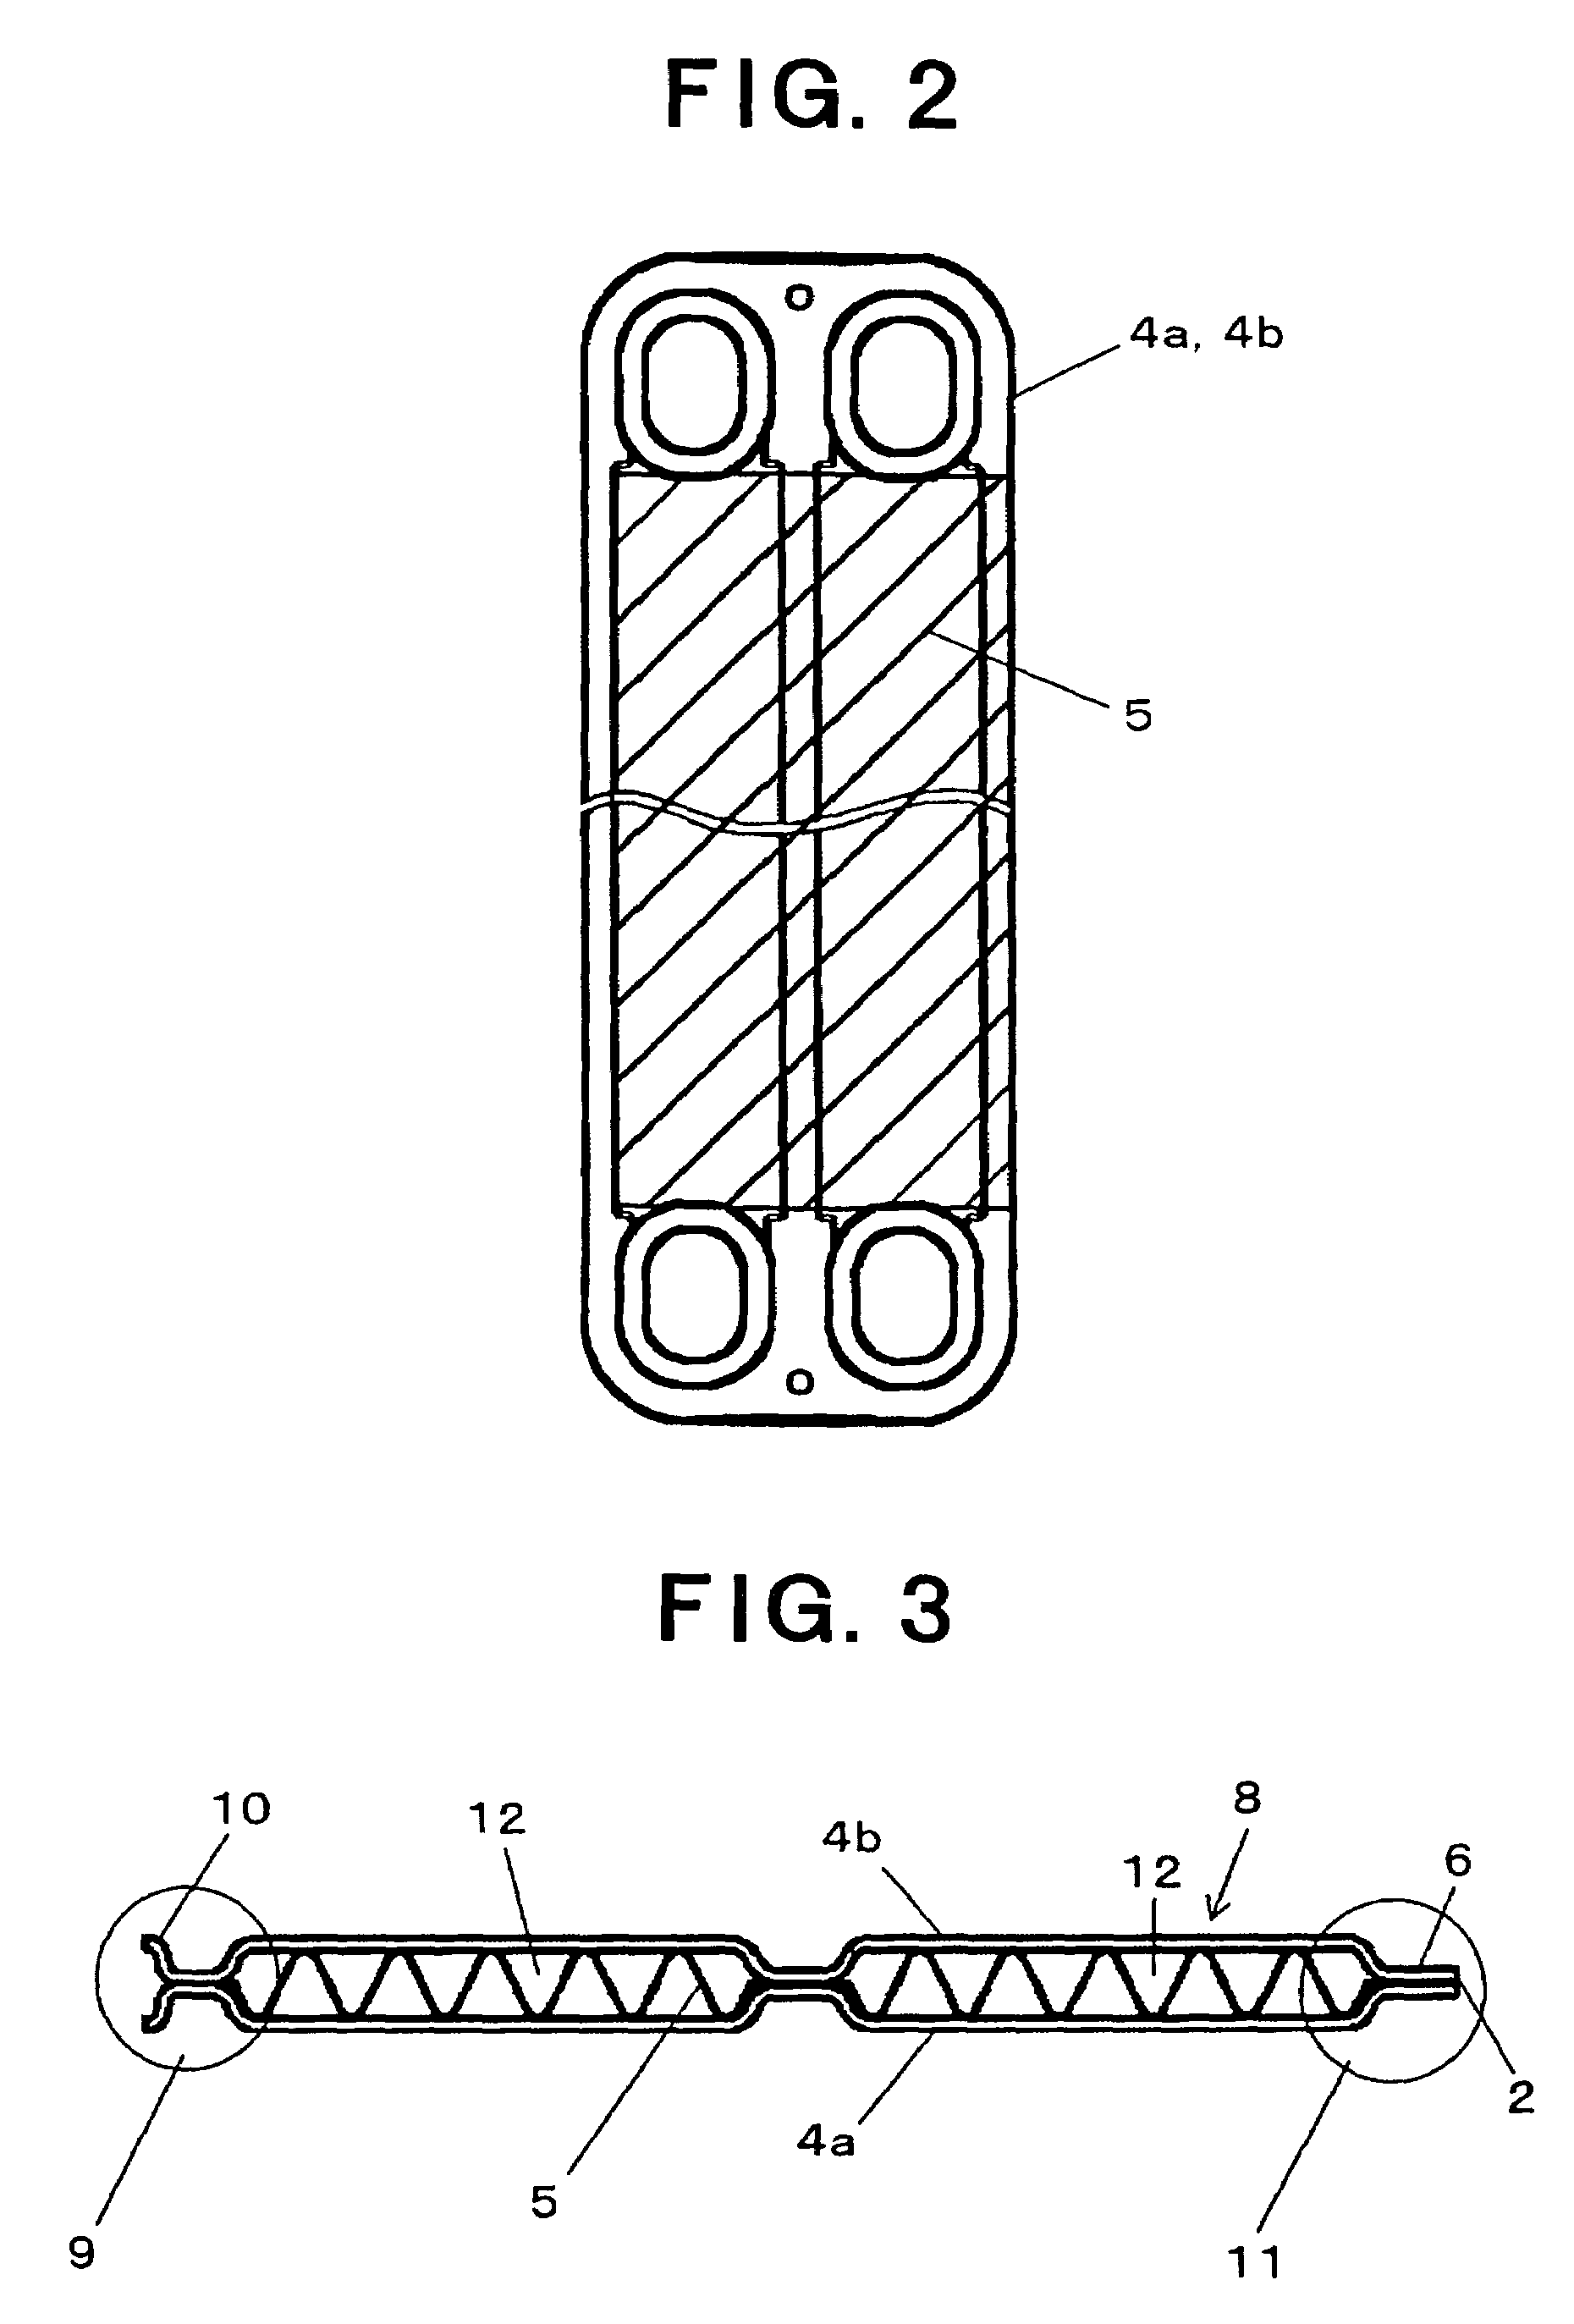 Stacking-type, multi-flow, heat exchangers and methods for manufacturing such heat exchangers